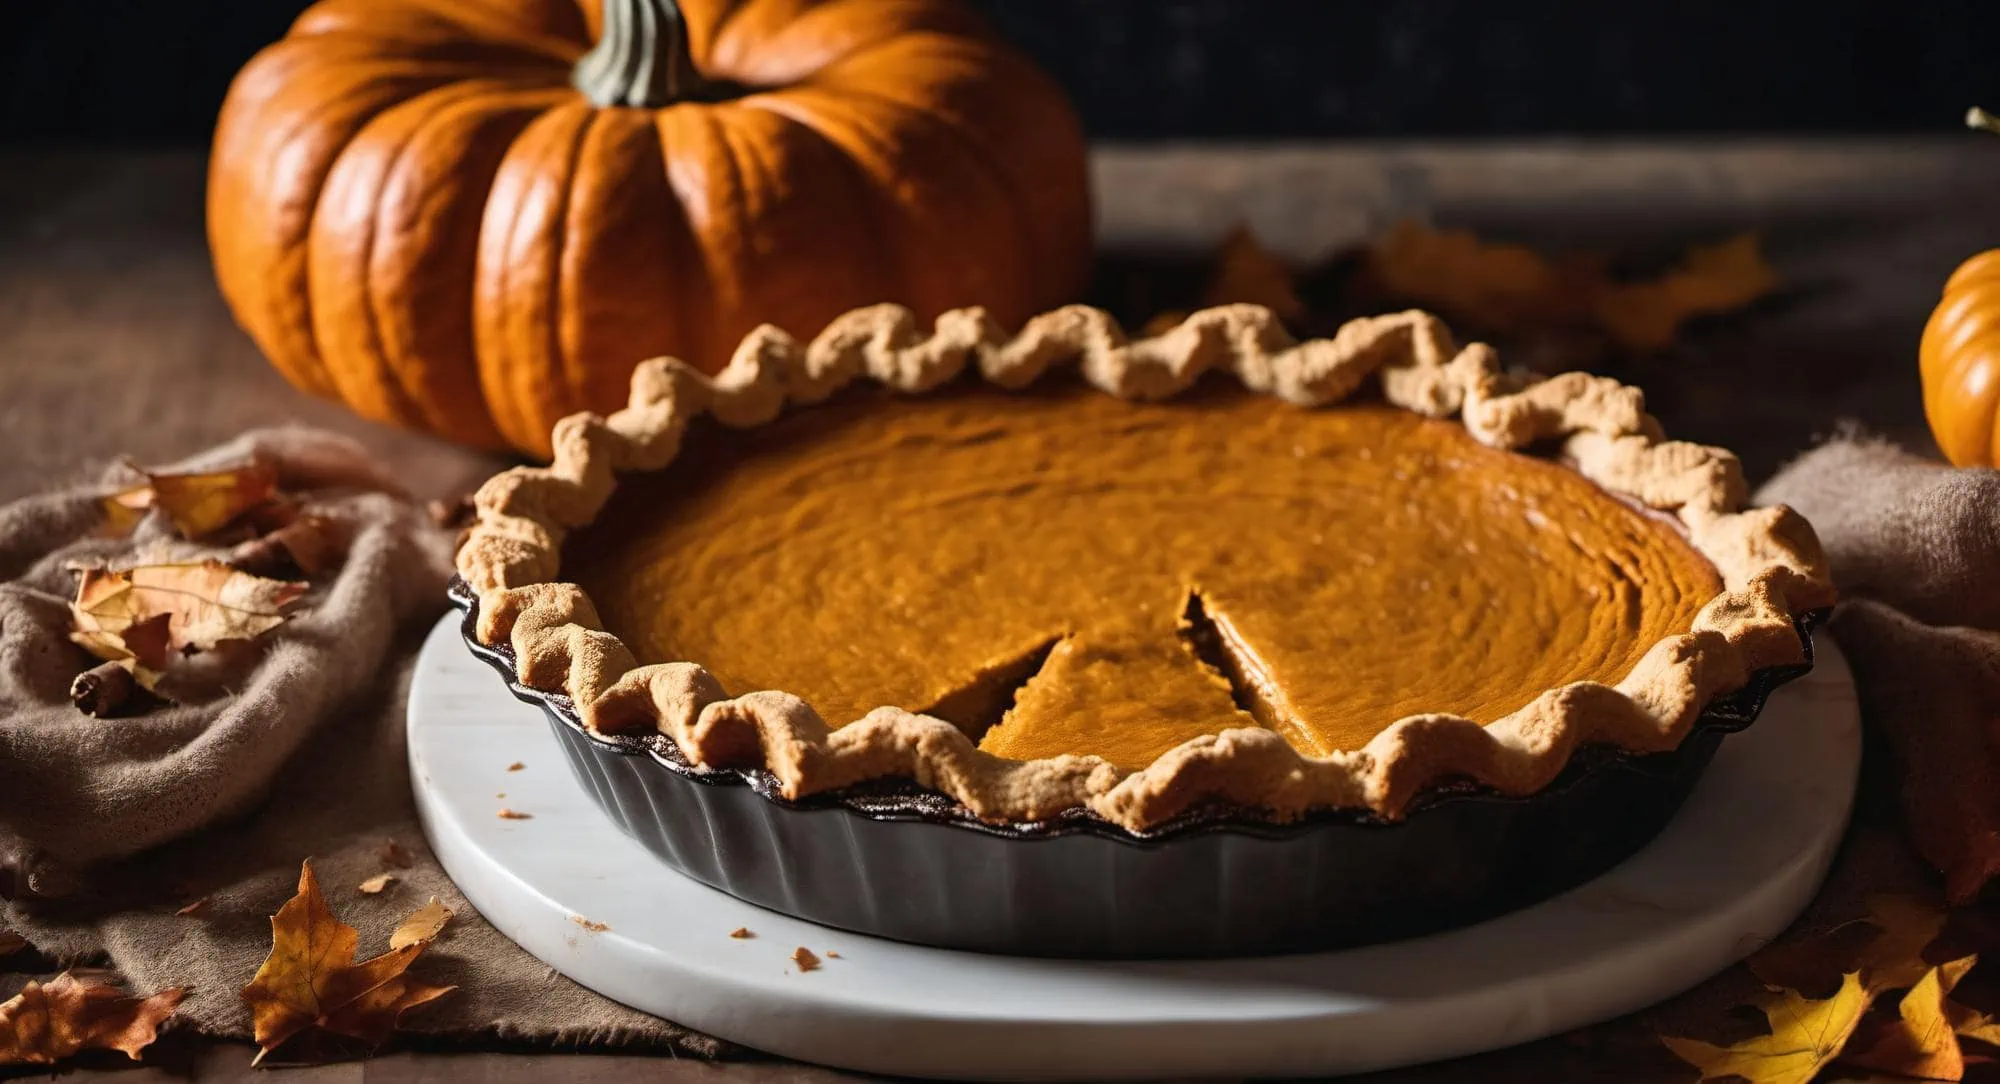 Libby's pumpkin pie recipe for two pies, without toppings